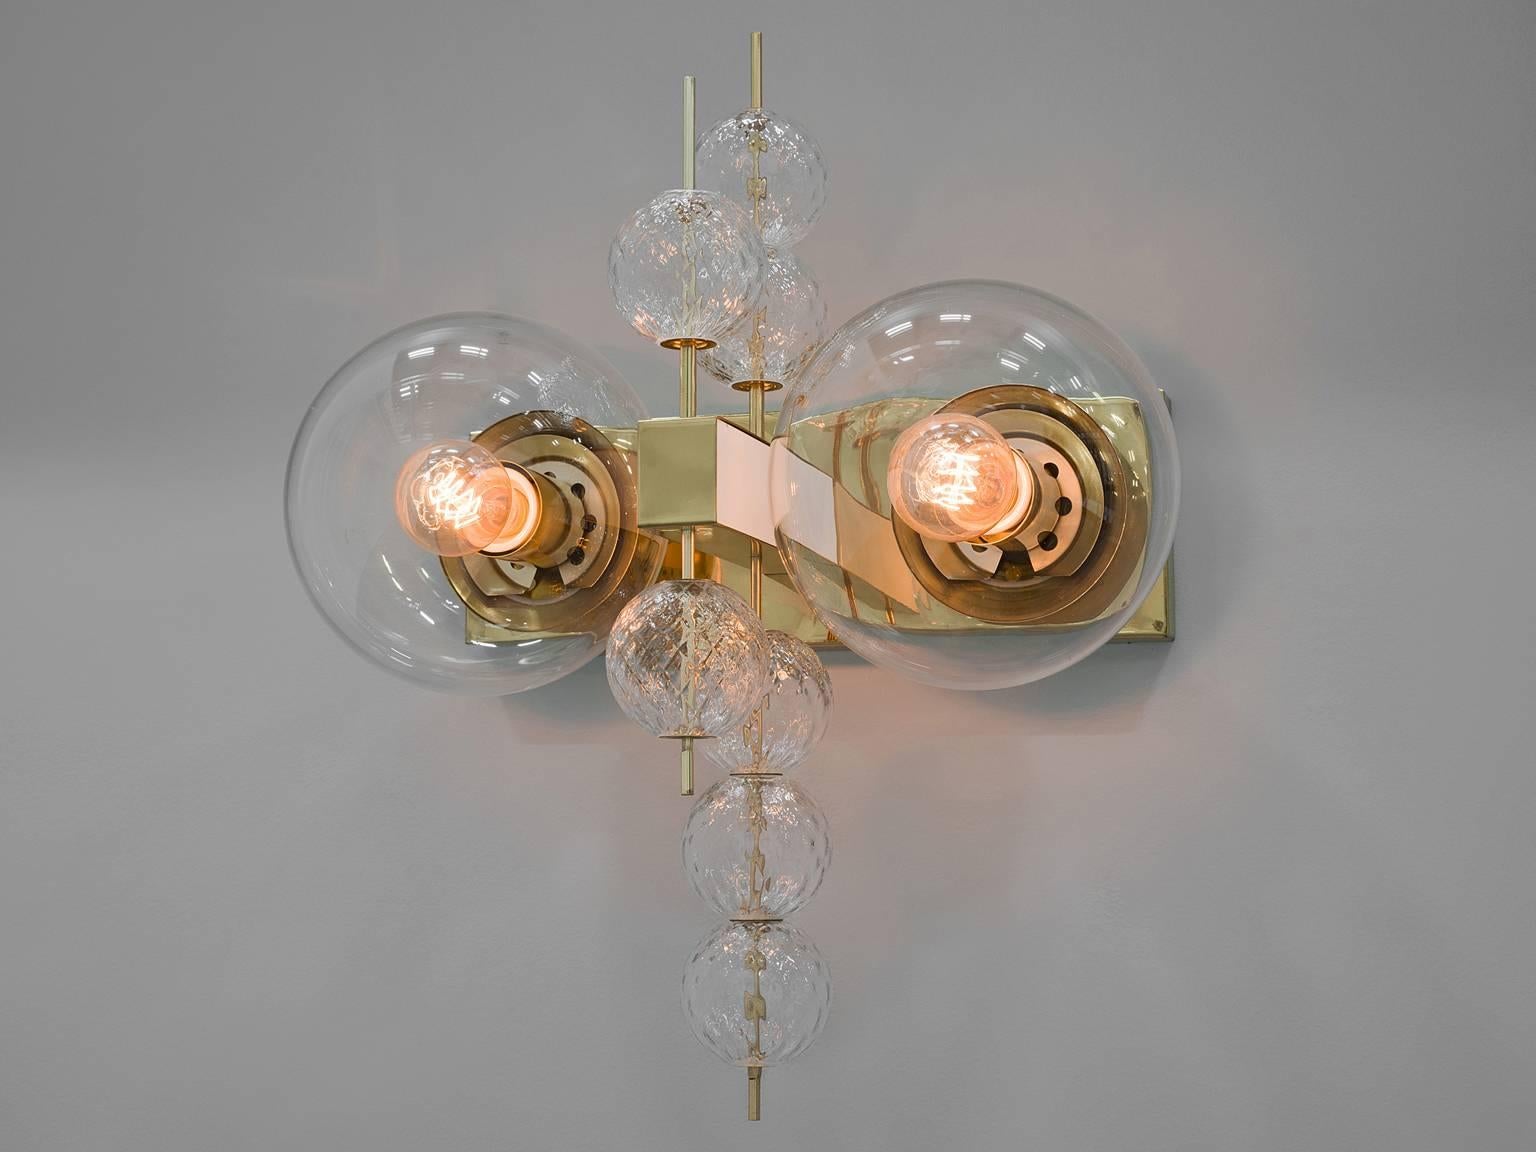 Chandelier in glass and brass, Europe, 1970s.

Ornate brass and glass wall light with two light points and small decorative structured glass globes. The chandelier is beautifully decorated thanks to the structured glass. The clear glass shades bring